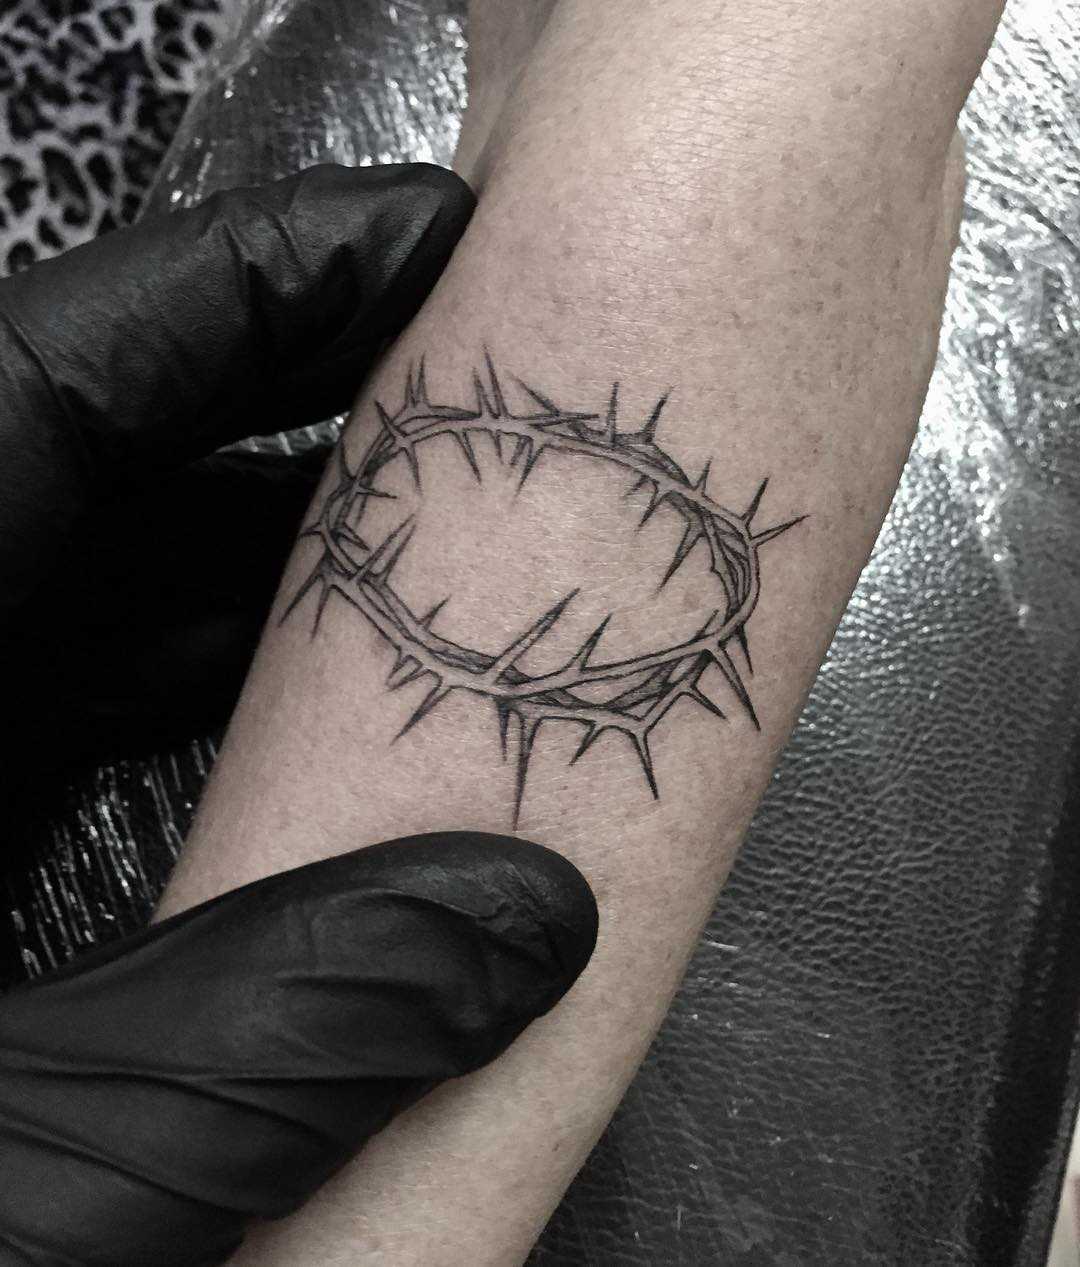 Thorns crown done at Primordial Pain Tattoo, Milano